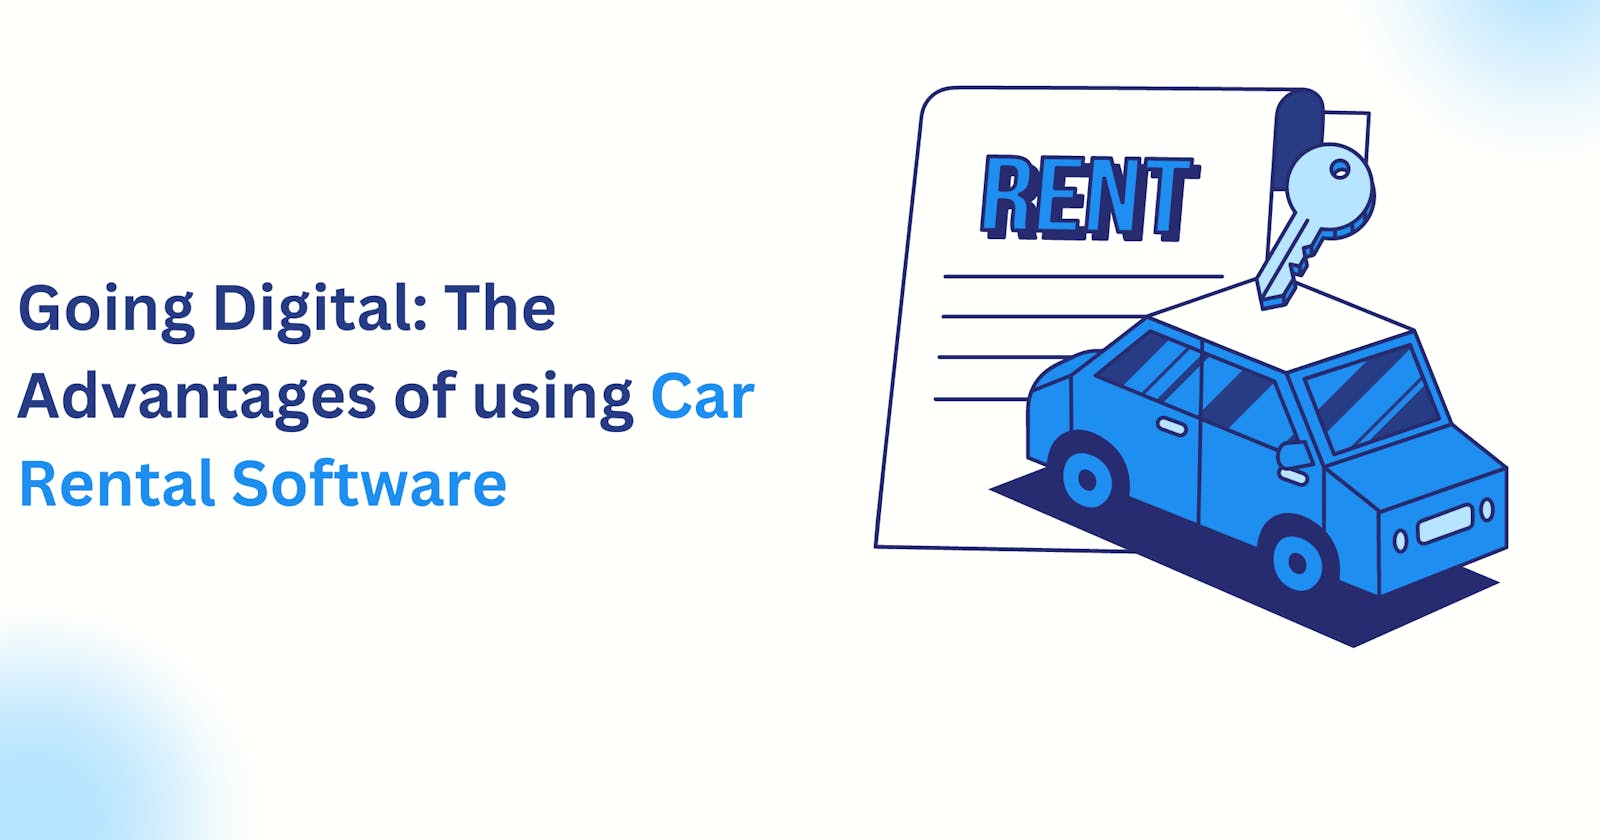 Going Digital: The Advantages of using Car Rental Software